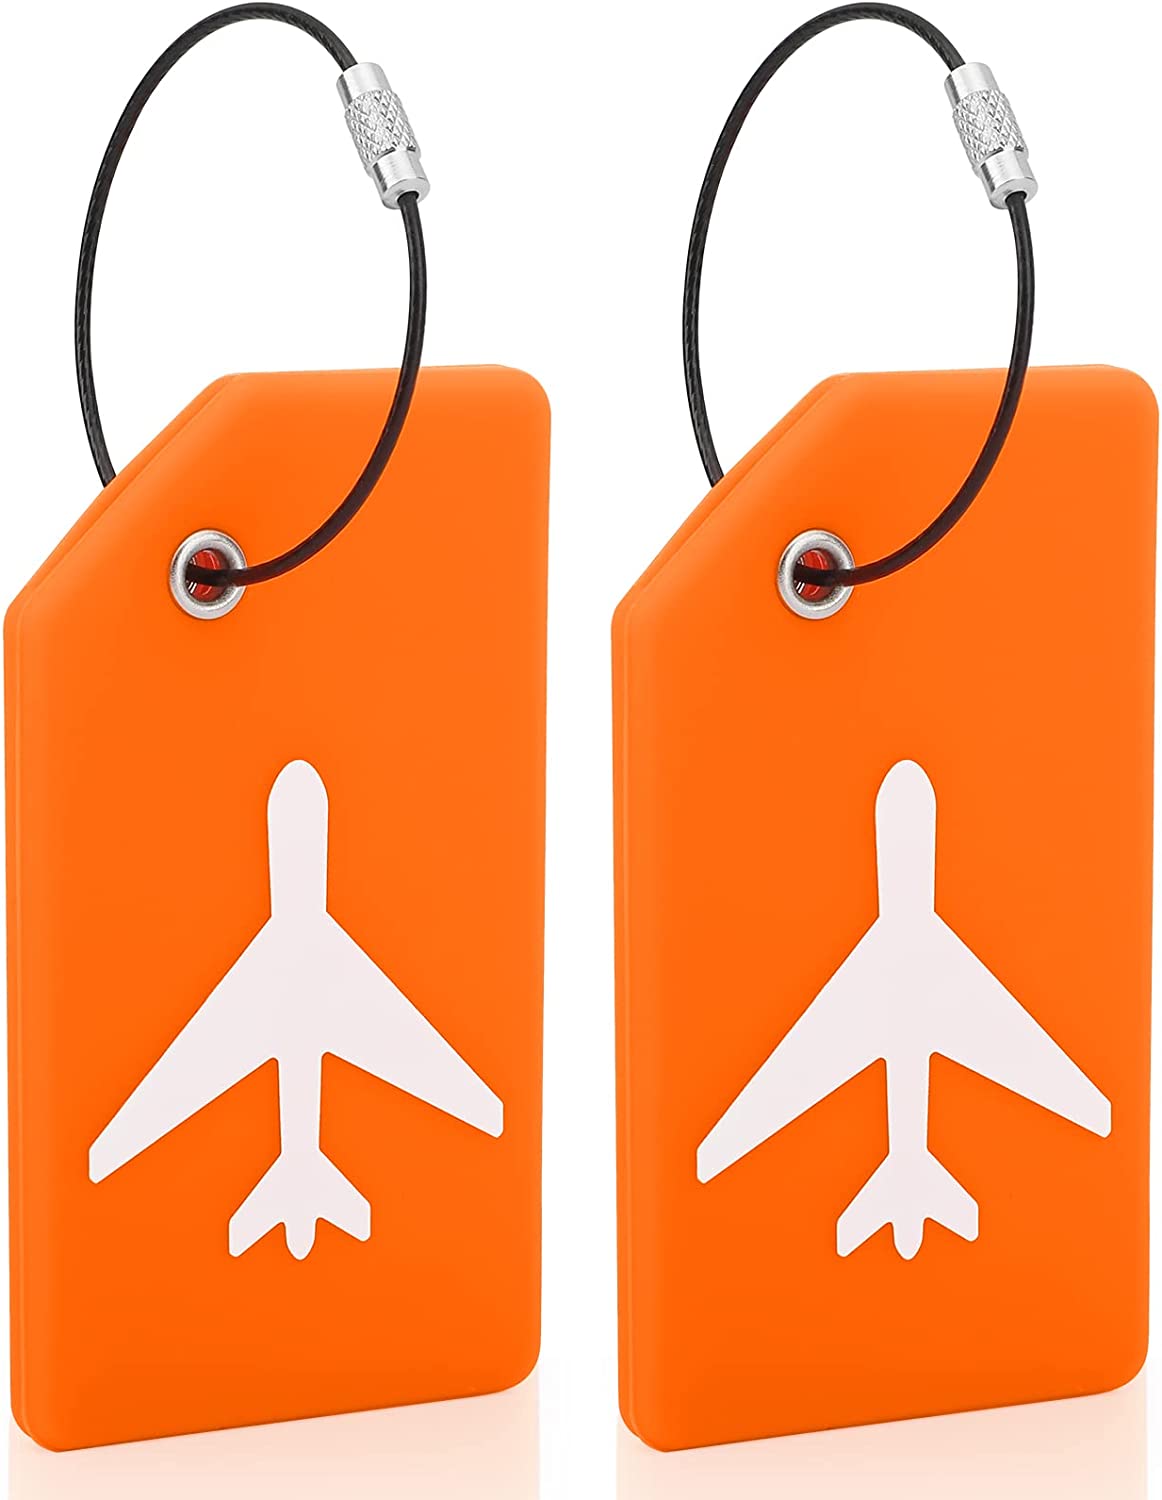 Silicone Luggage Tags for Suitcases, 2 Pack Luggage Tag with Name ID Card, Bag Tags for Luggage with Stainless Steel Loop, Quickly Spot Luggage Identifier Tags for Travel Bag Suitcase - image 1 of 5